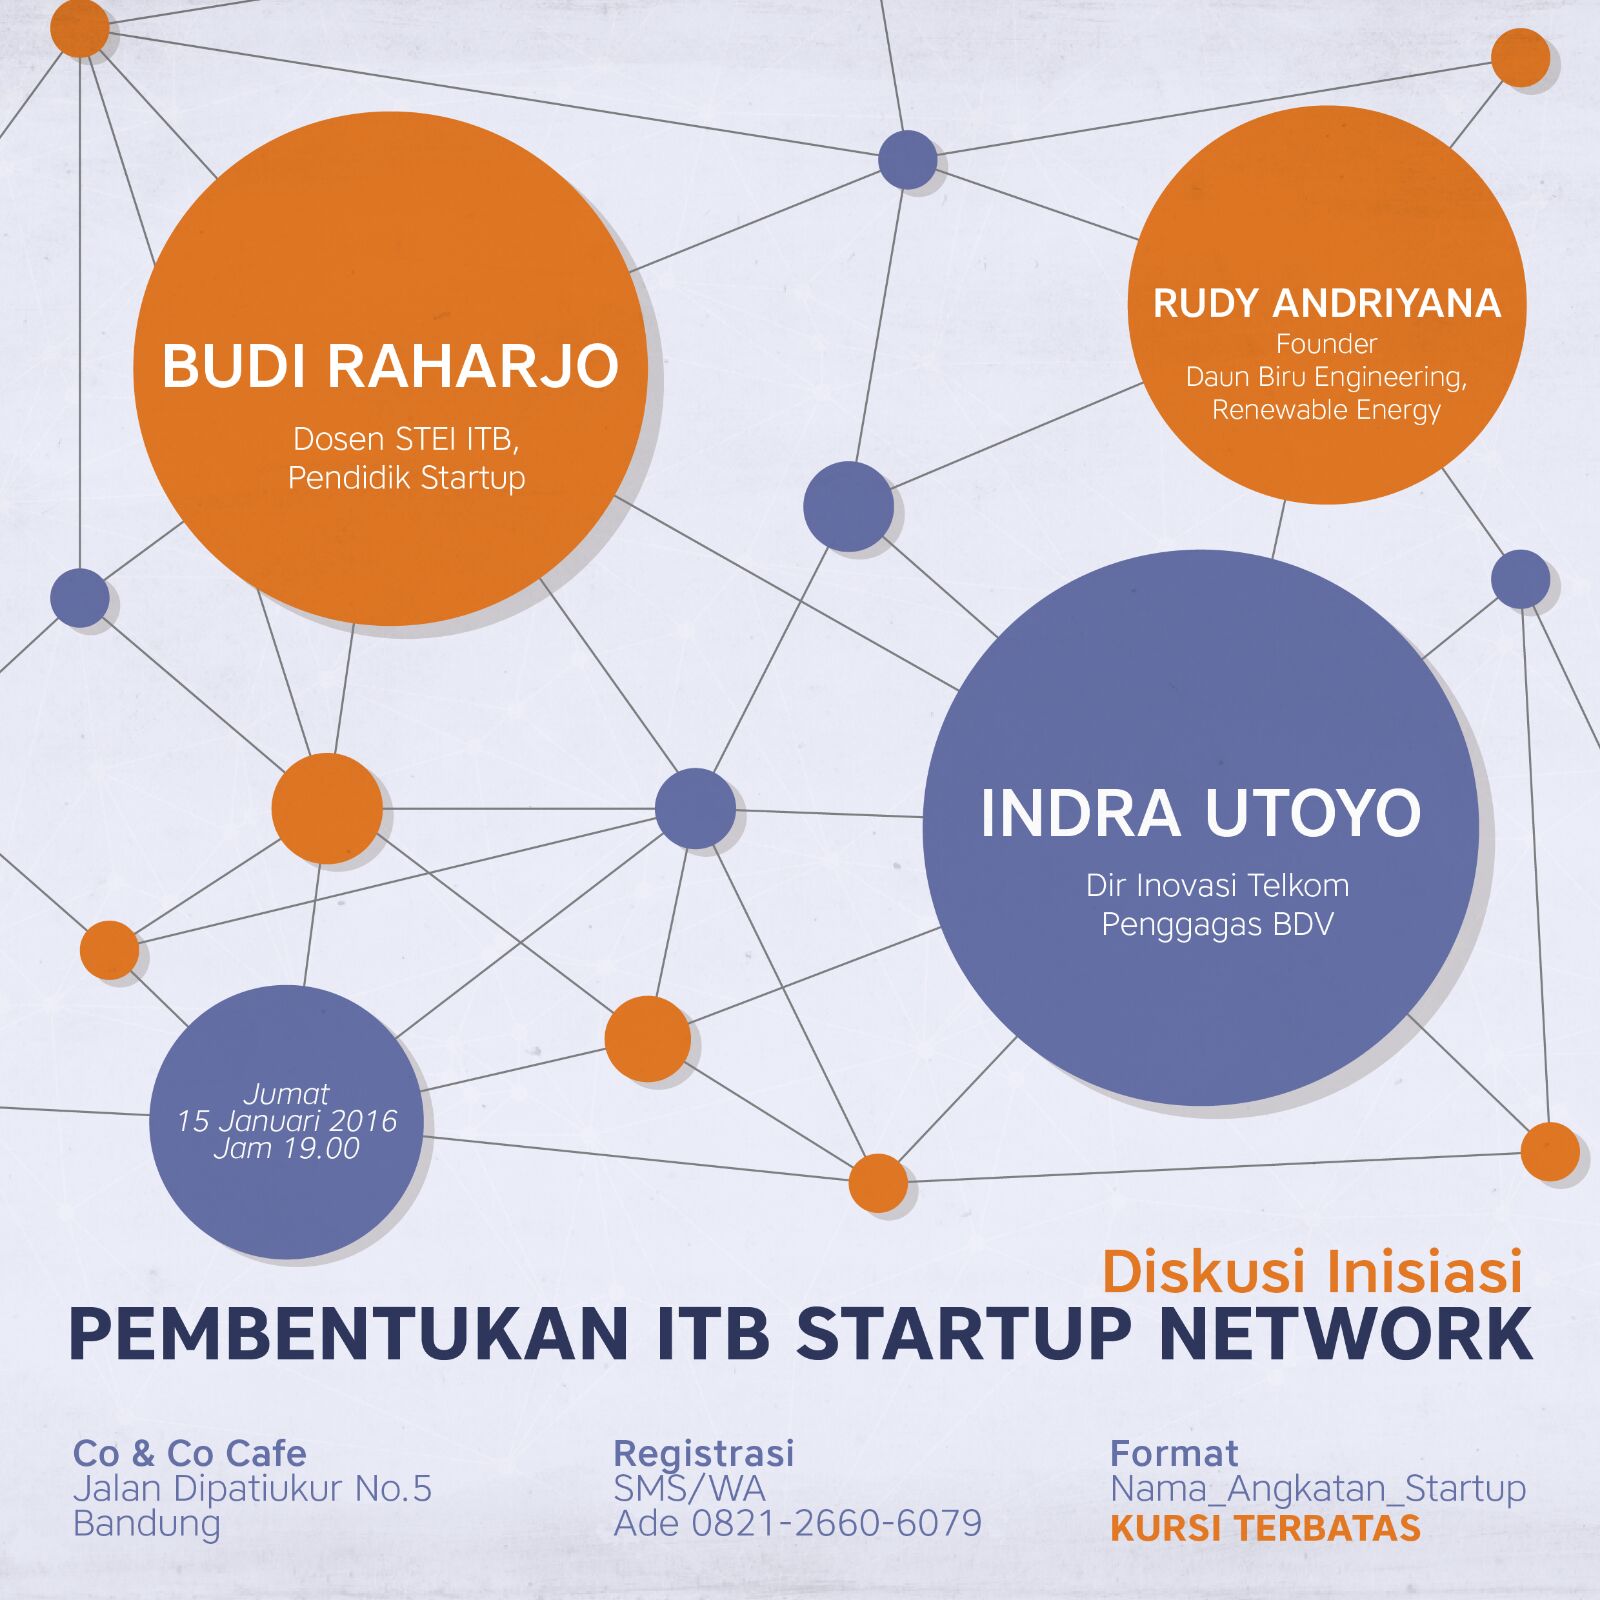 ITB startup network